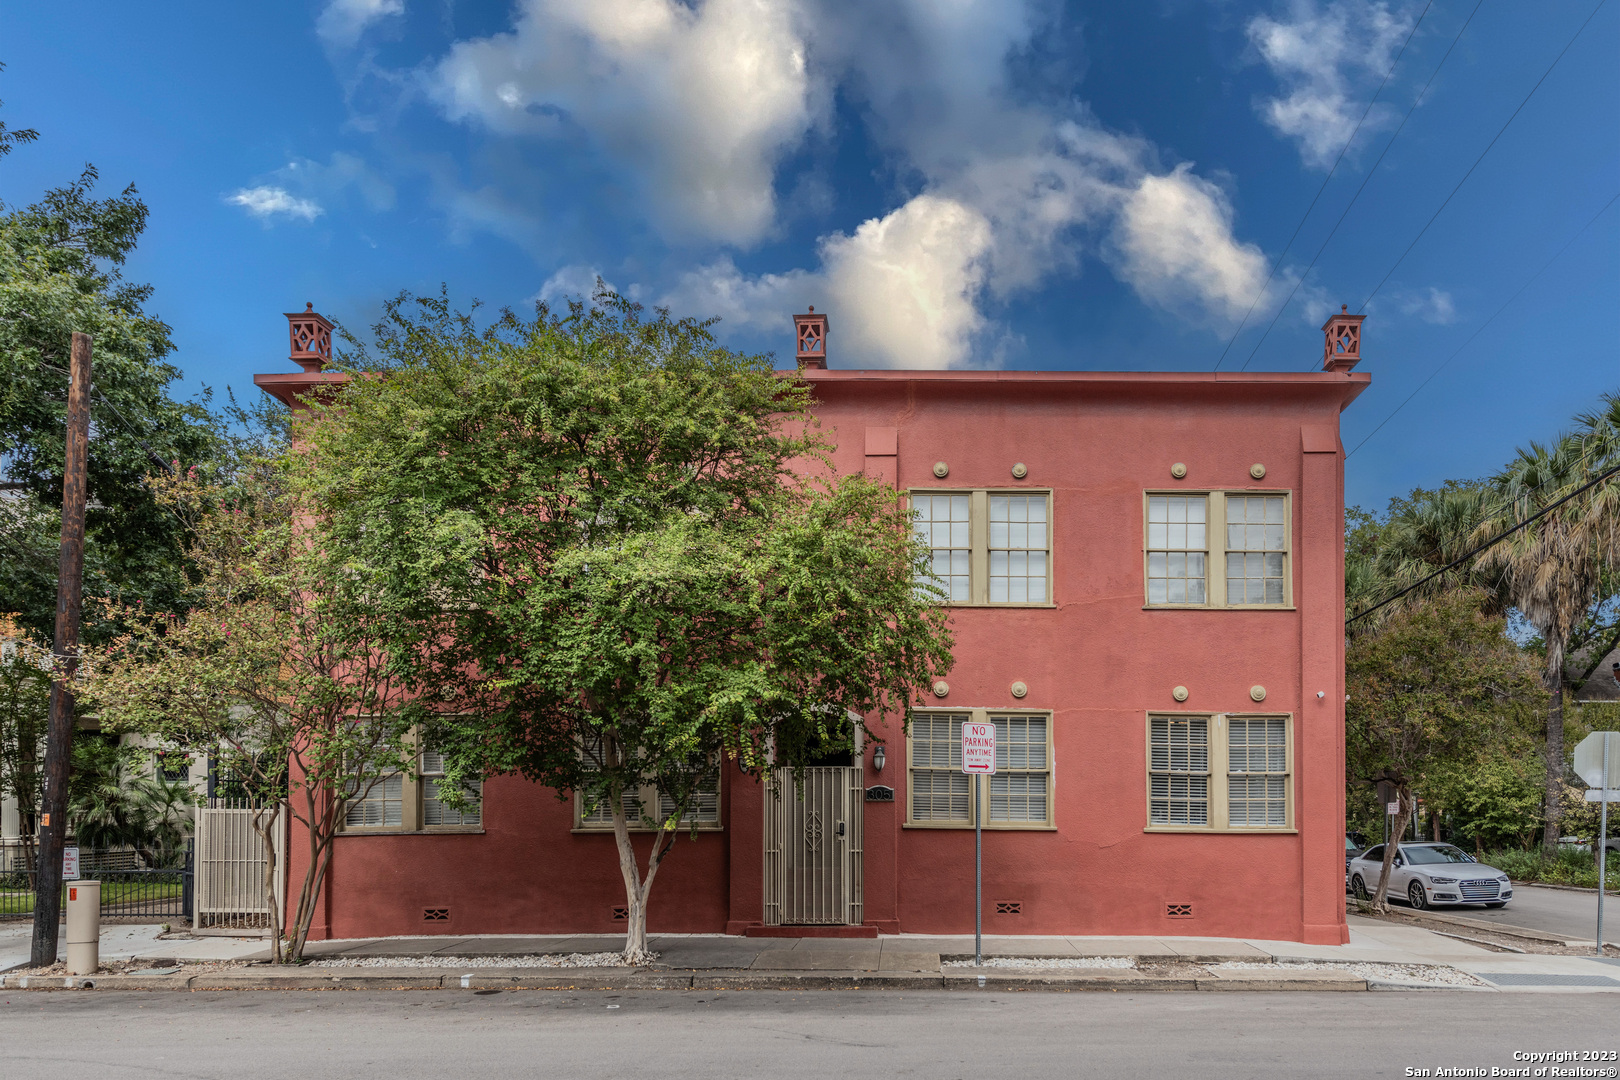 Madison Condos are TRULY in the HEART of King William Historic District in Southtown San Antonio! Enjoy a walkable lifestyle with coffee shops, restaurants, shopping and more just steps from your front door. This studio condo is perfect for a minimalist urban lifestyle, second home or a downtown crash pad!